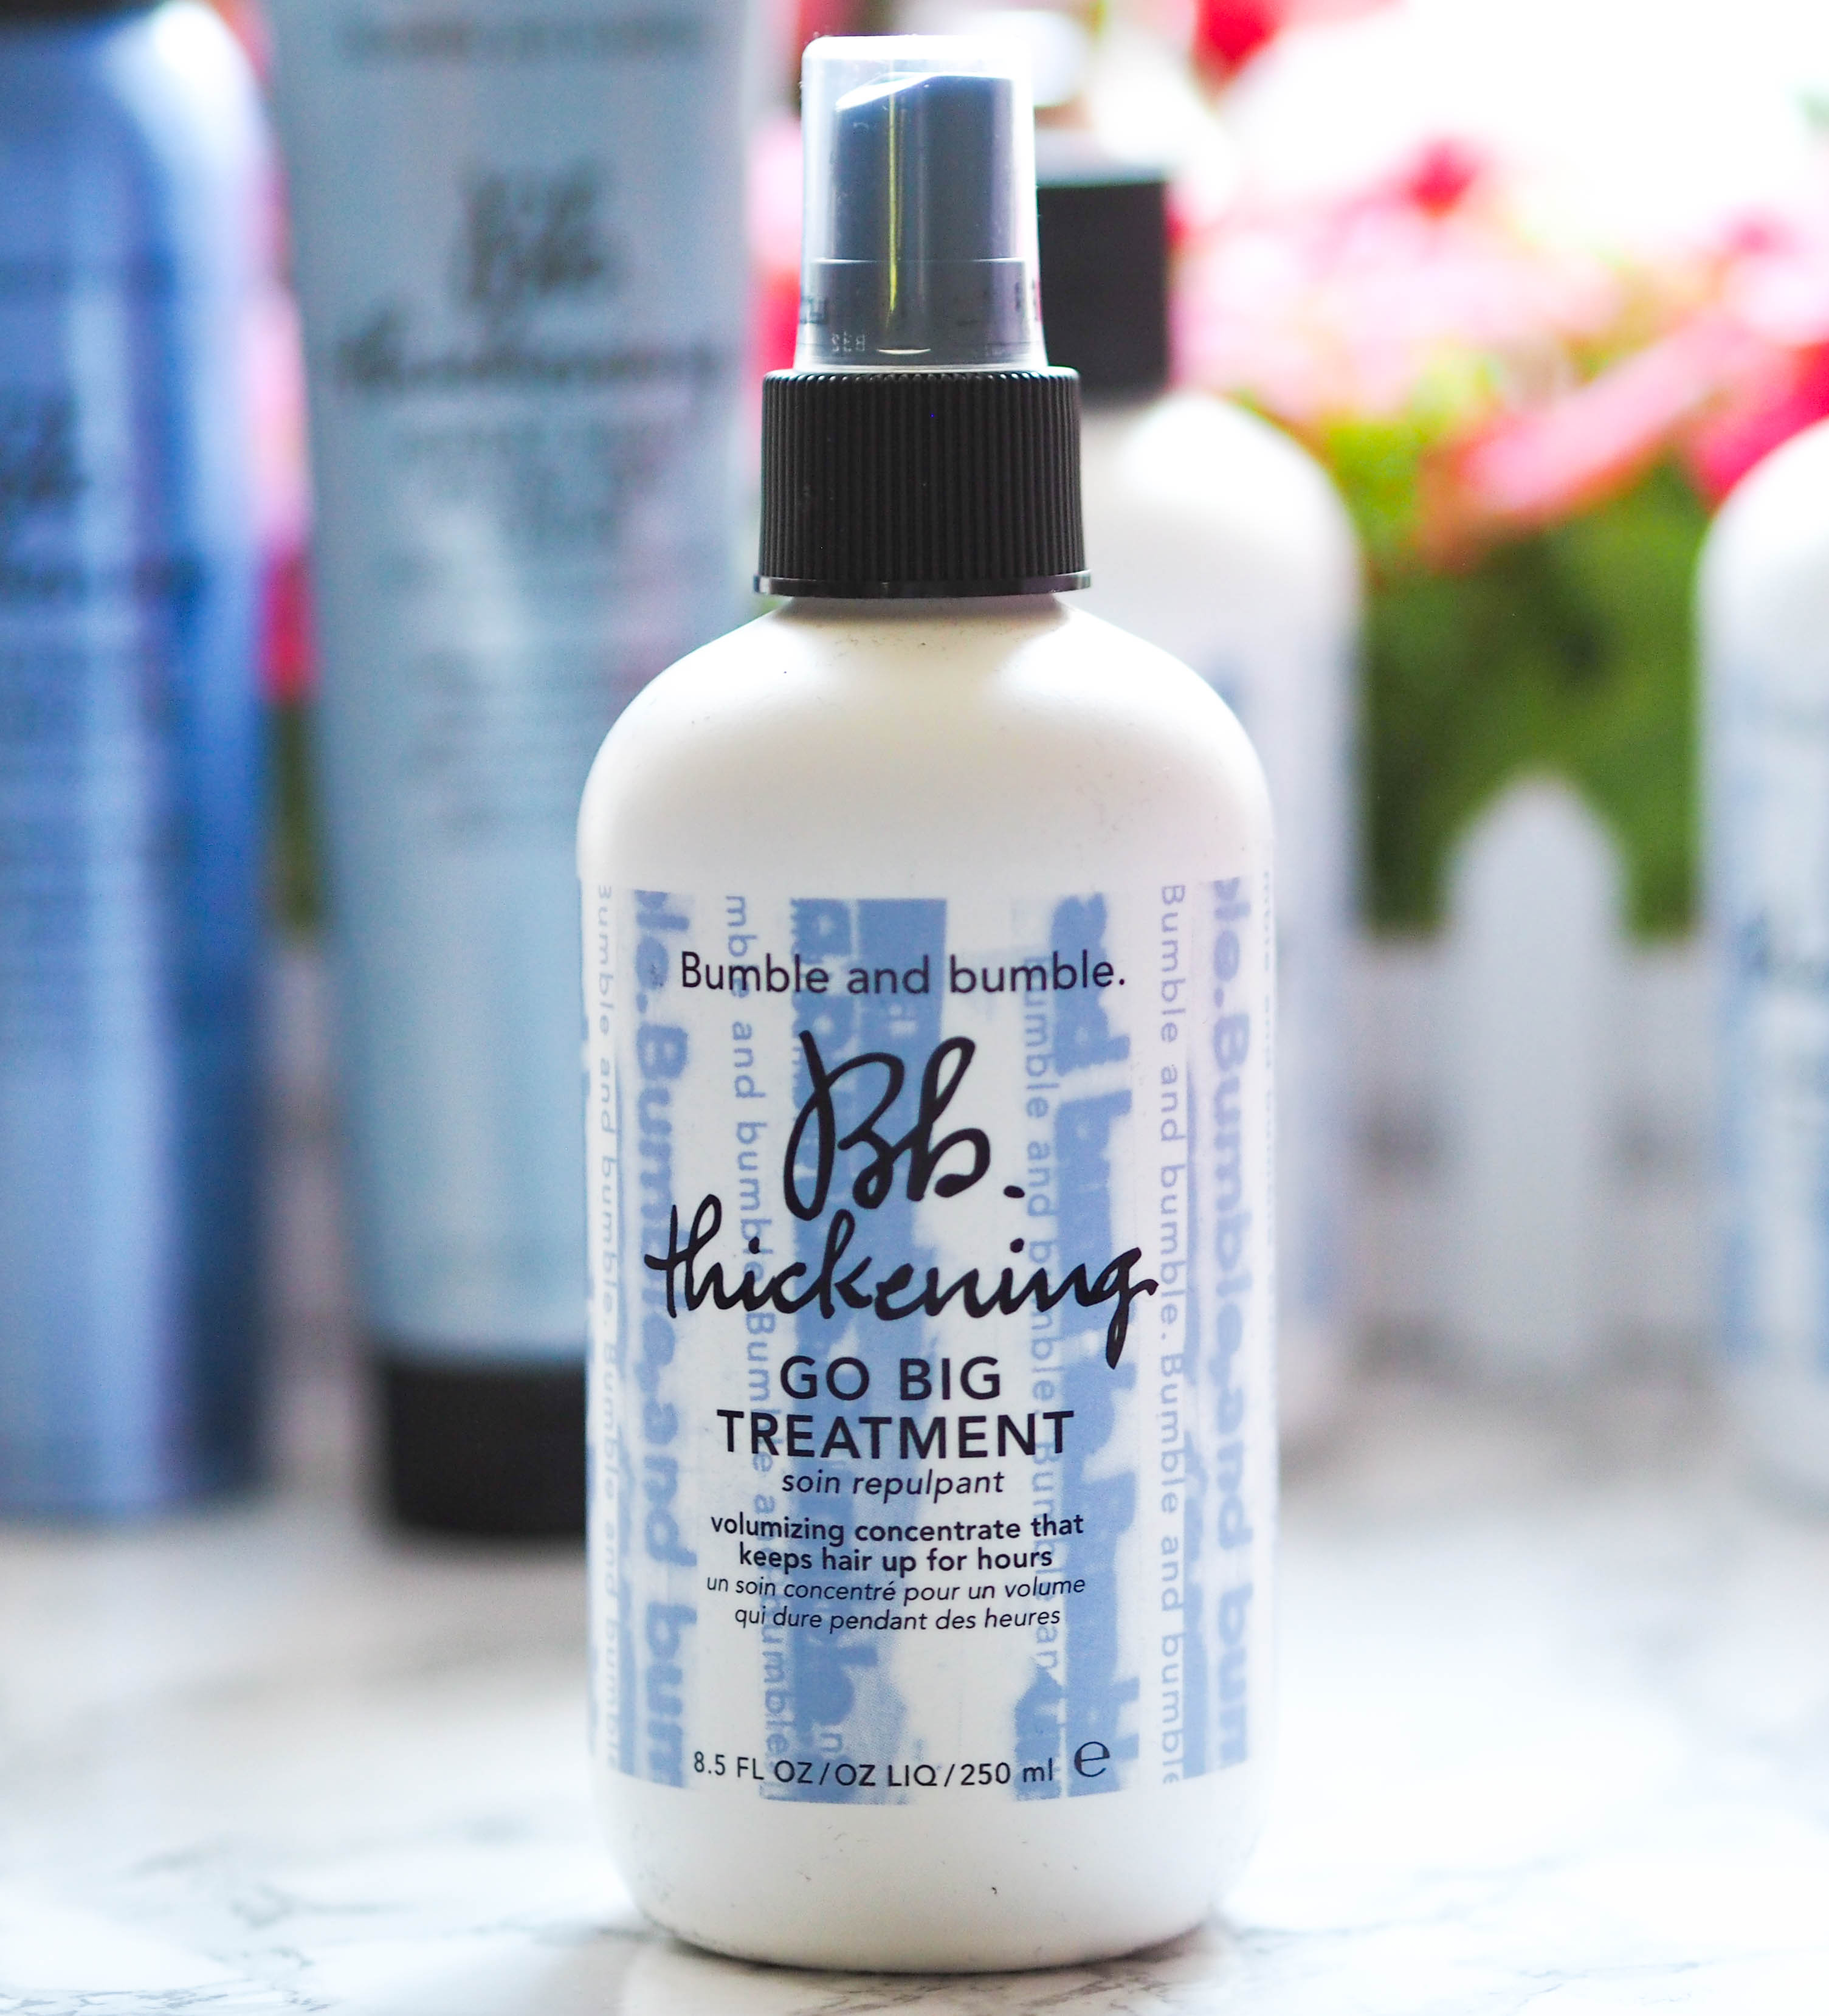 Bumble and Bumble BB Thickening Range - Beauty Geek UK